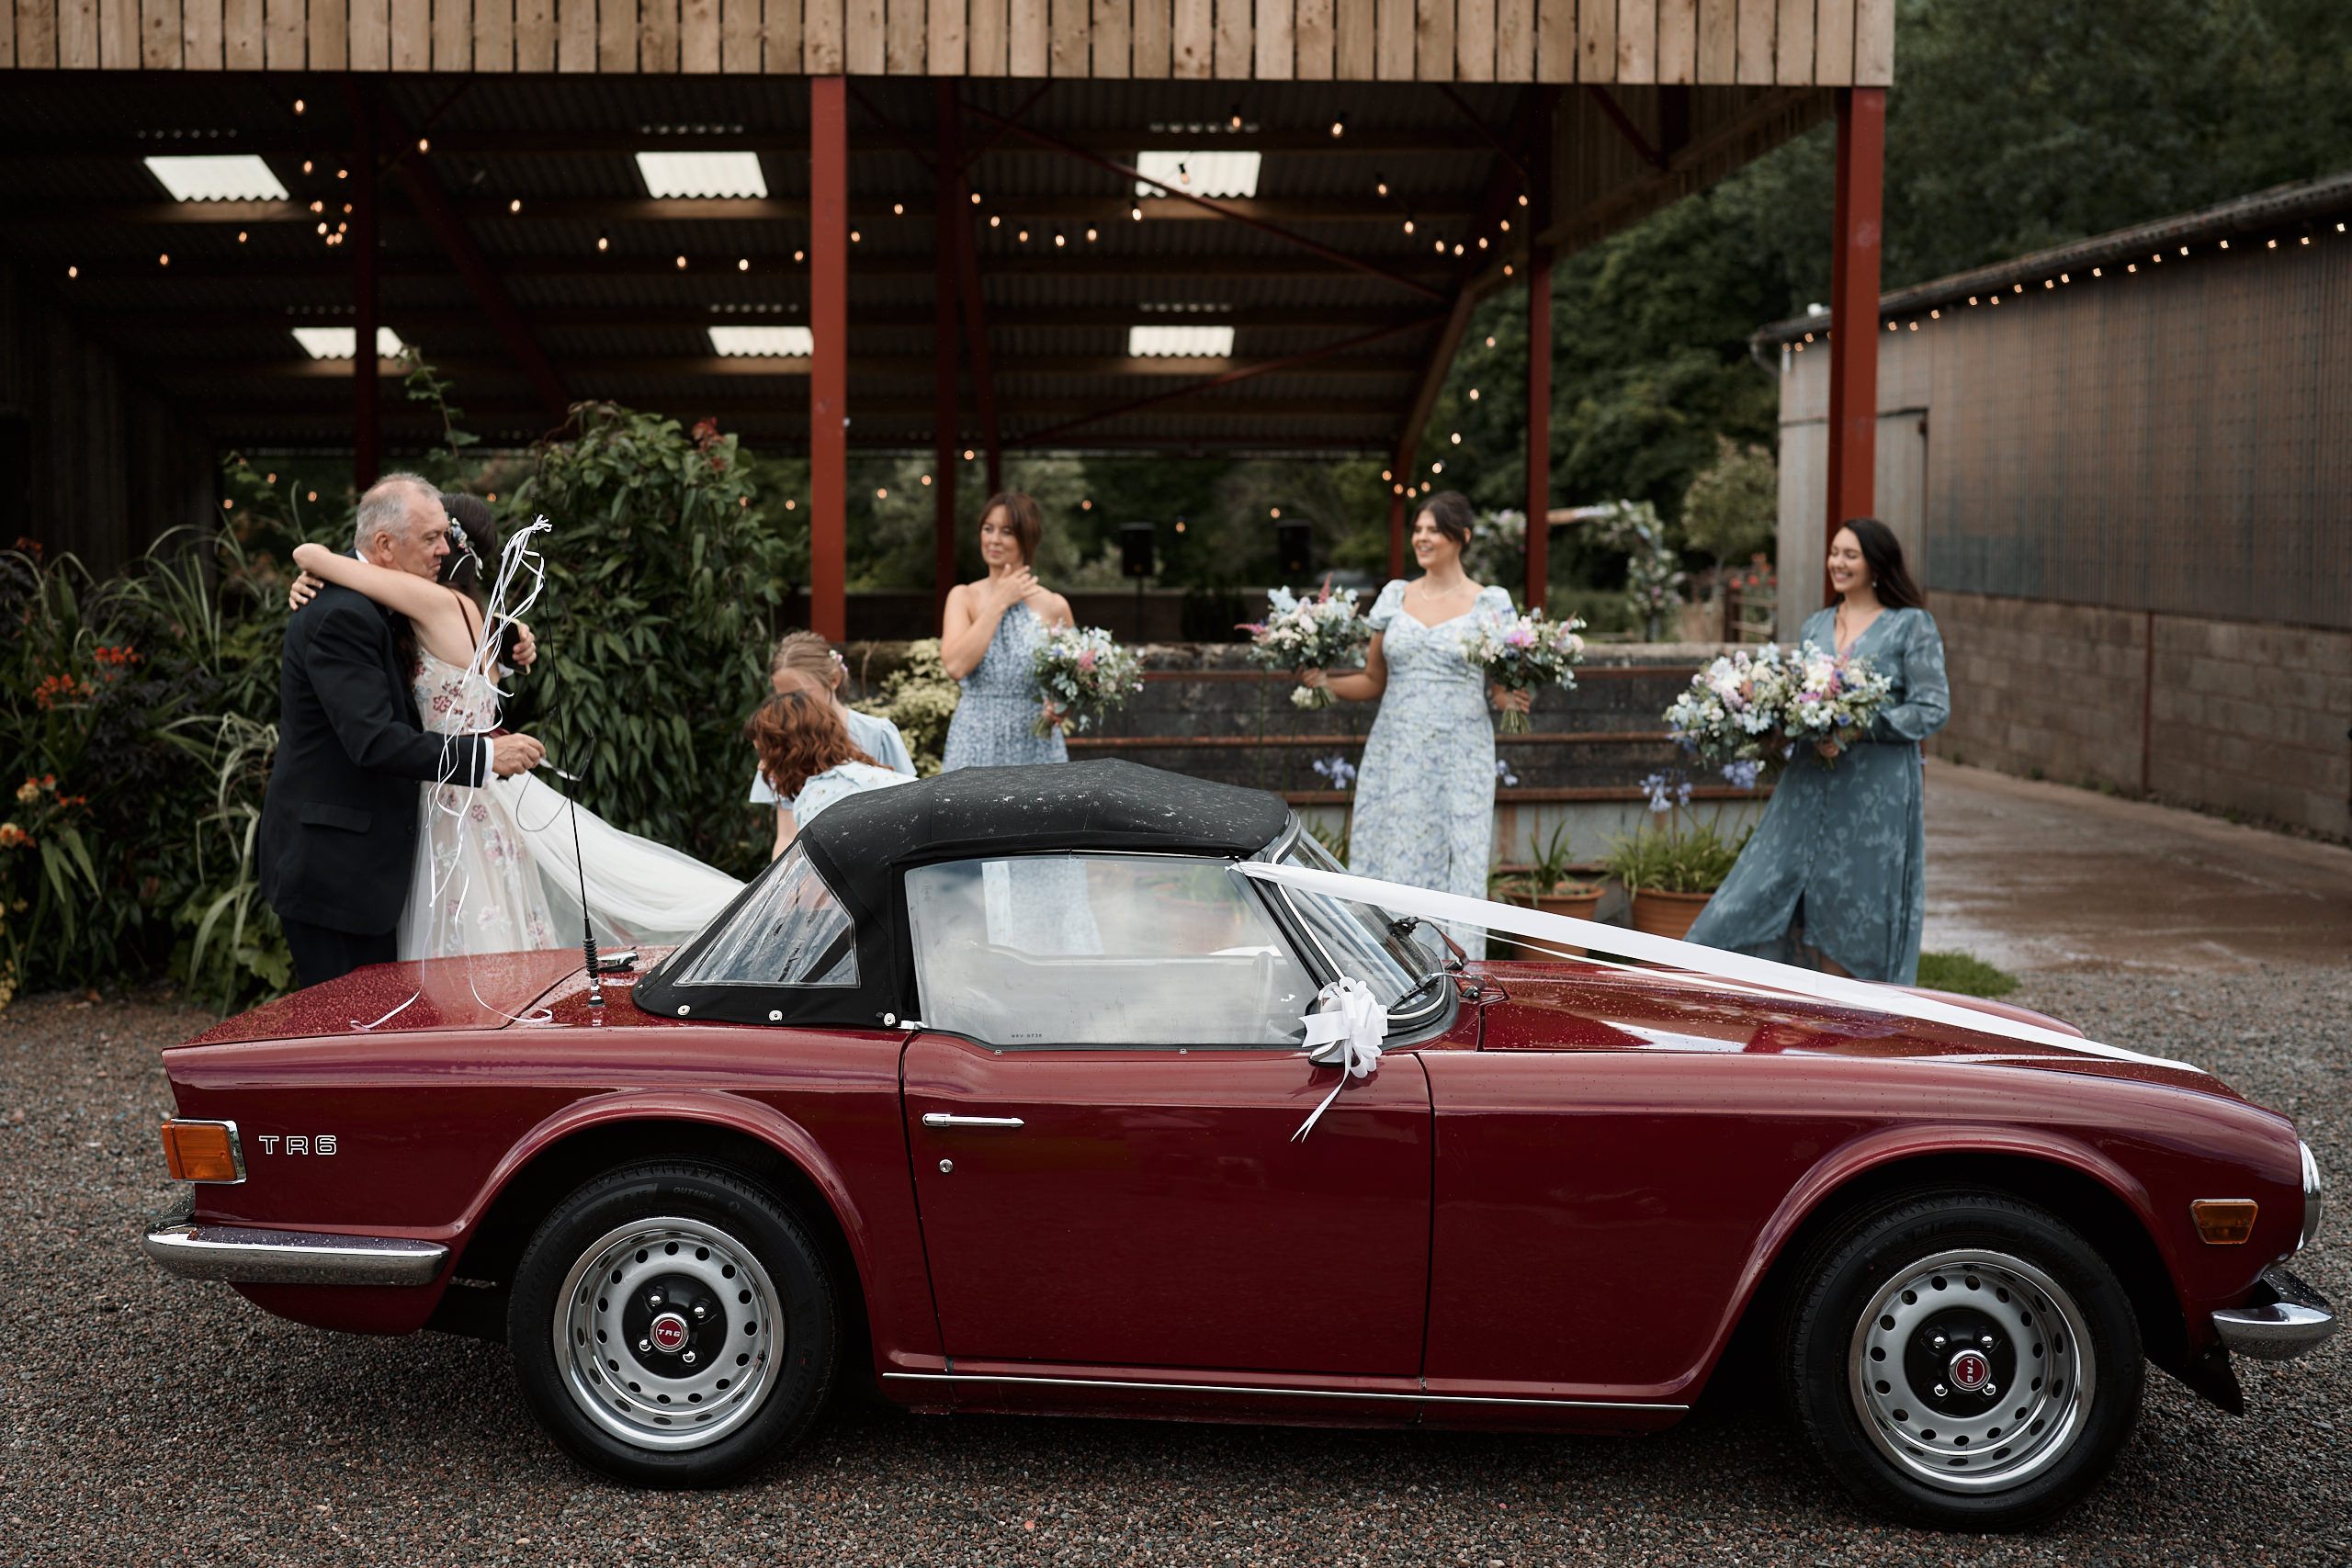 A bride and her friends are standing next to a red sports car.